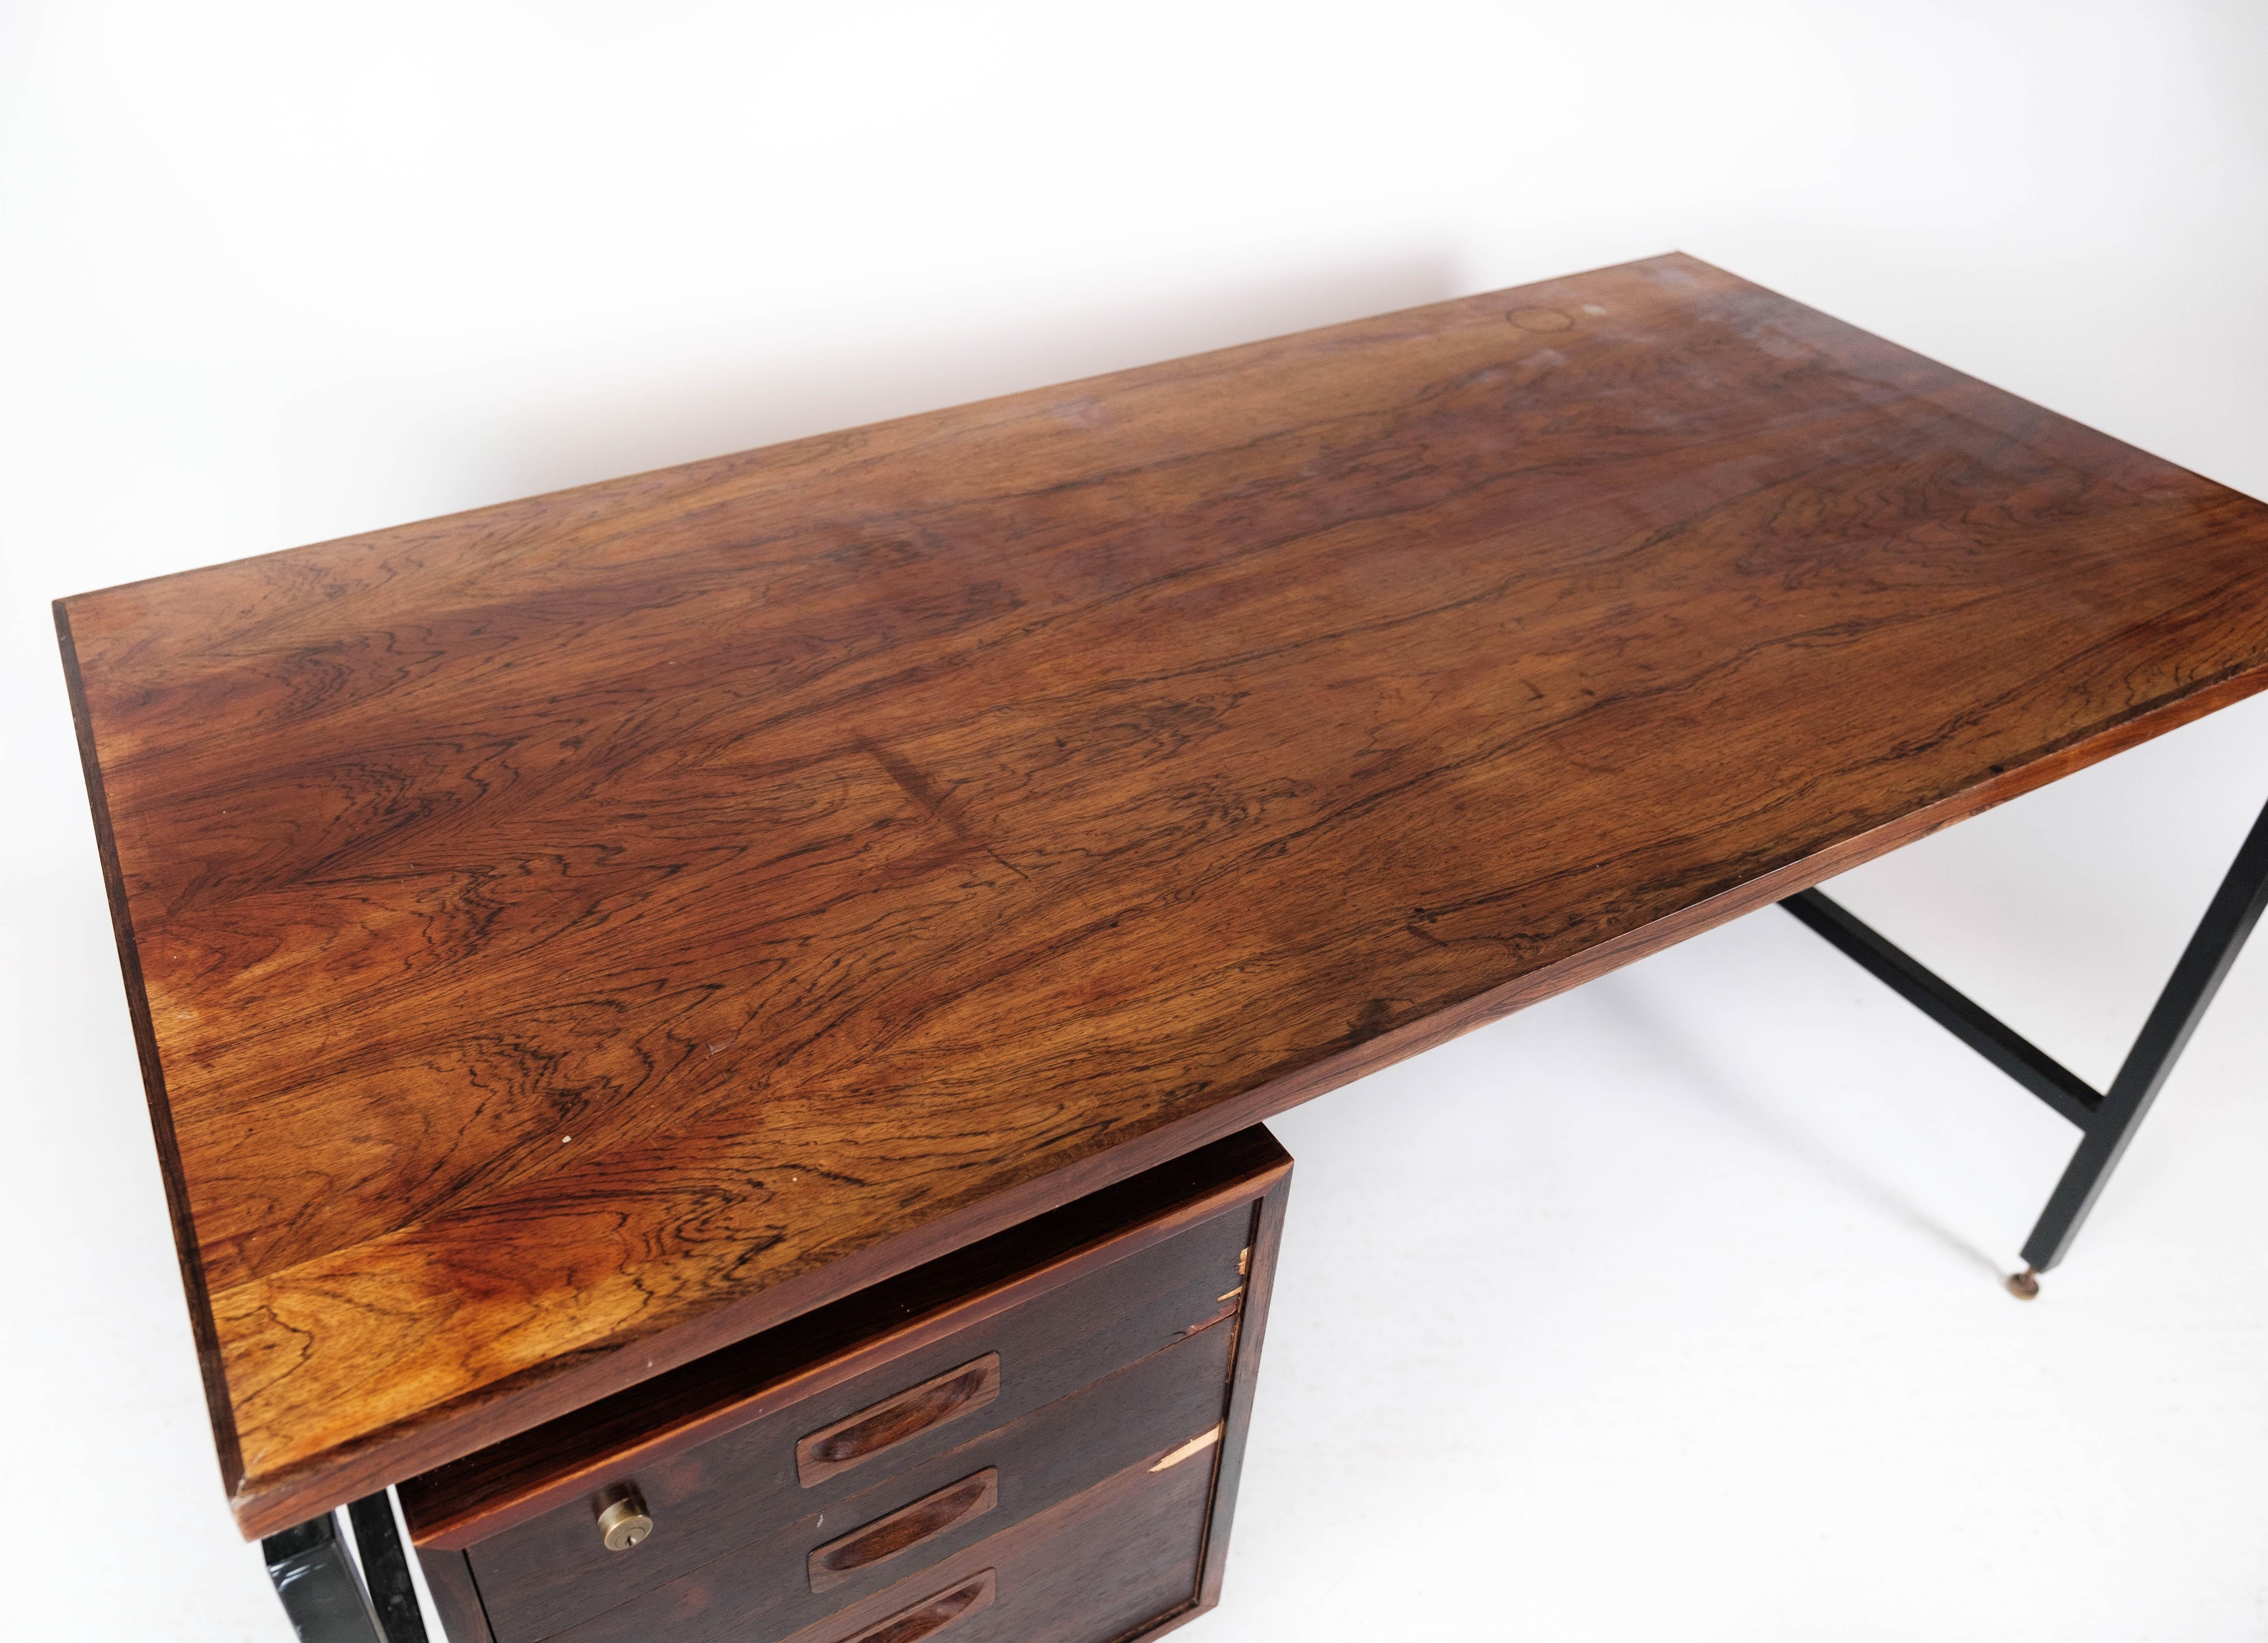 Desk in Rosewood and Legs in Metal, of Danish Design, 1960s For Sale 8